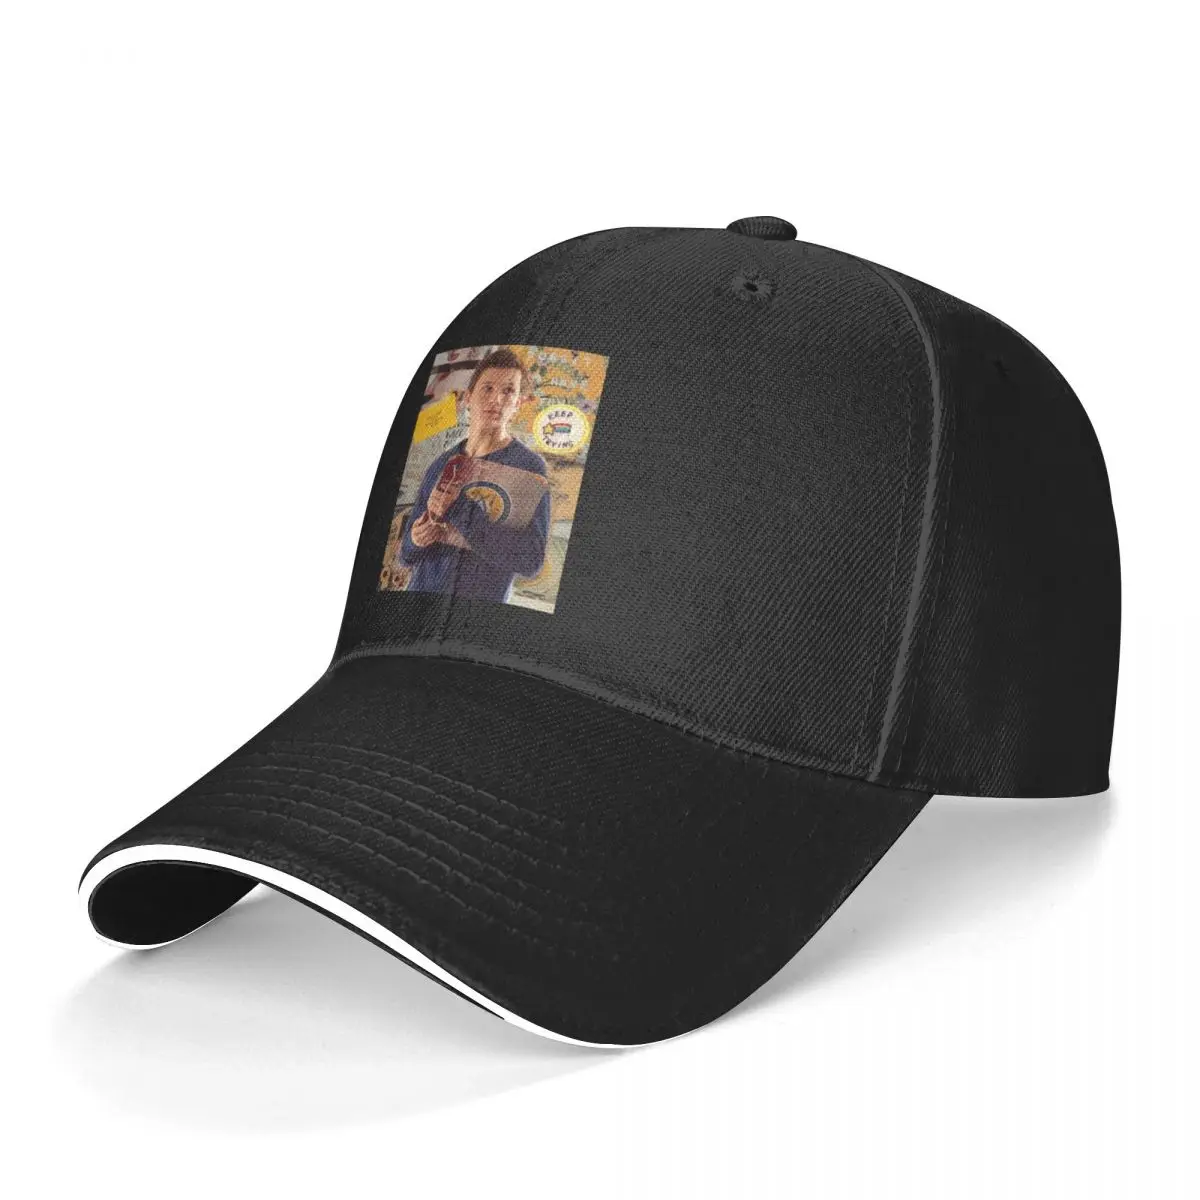 Tom Holland Baseball Cap Keep Trying Sport Trucker Hat Breathable Men Fitted Print Snapback Cap